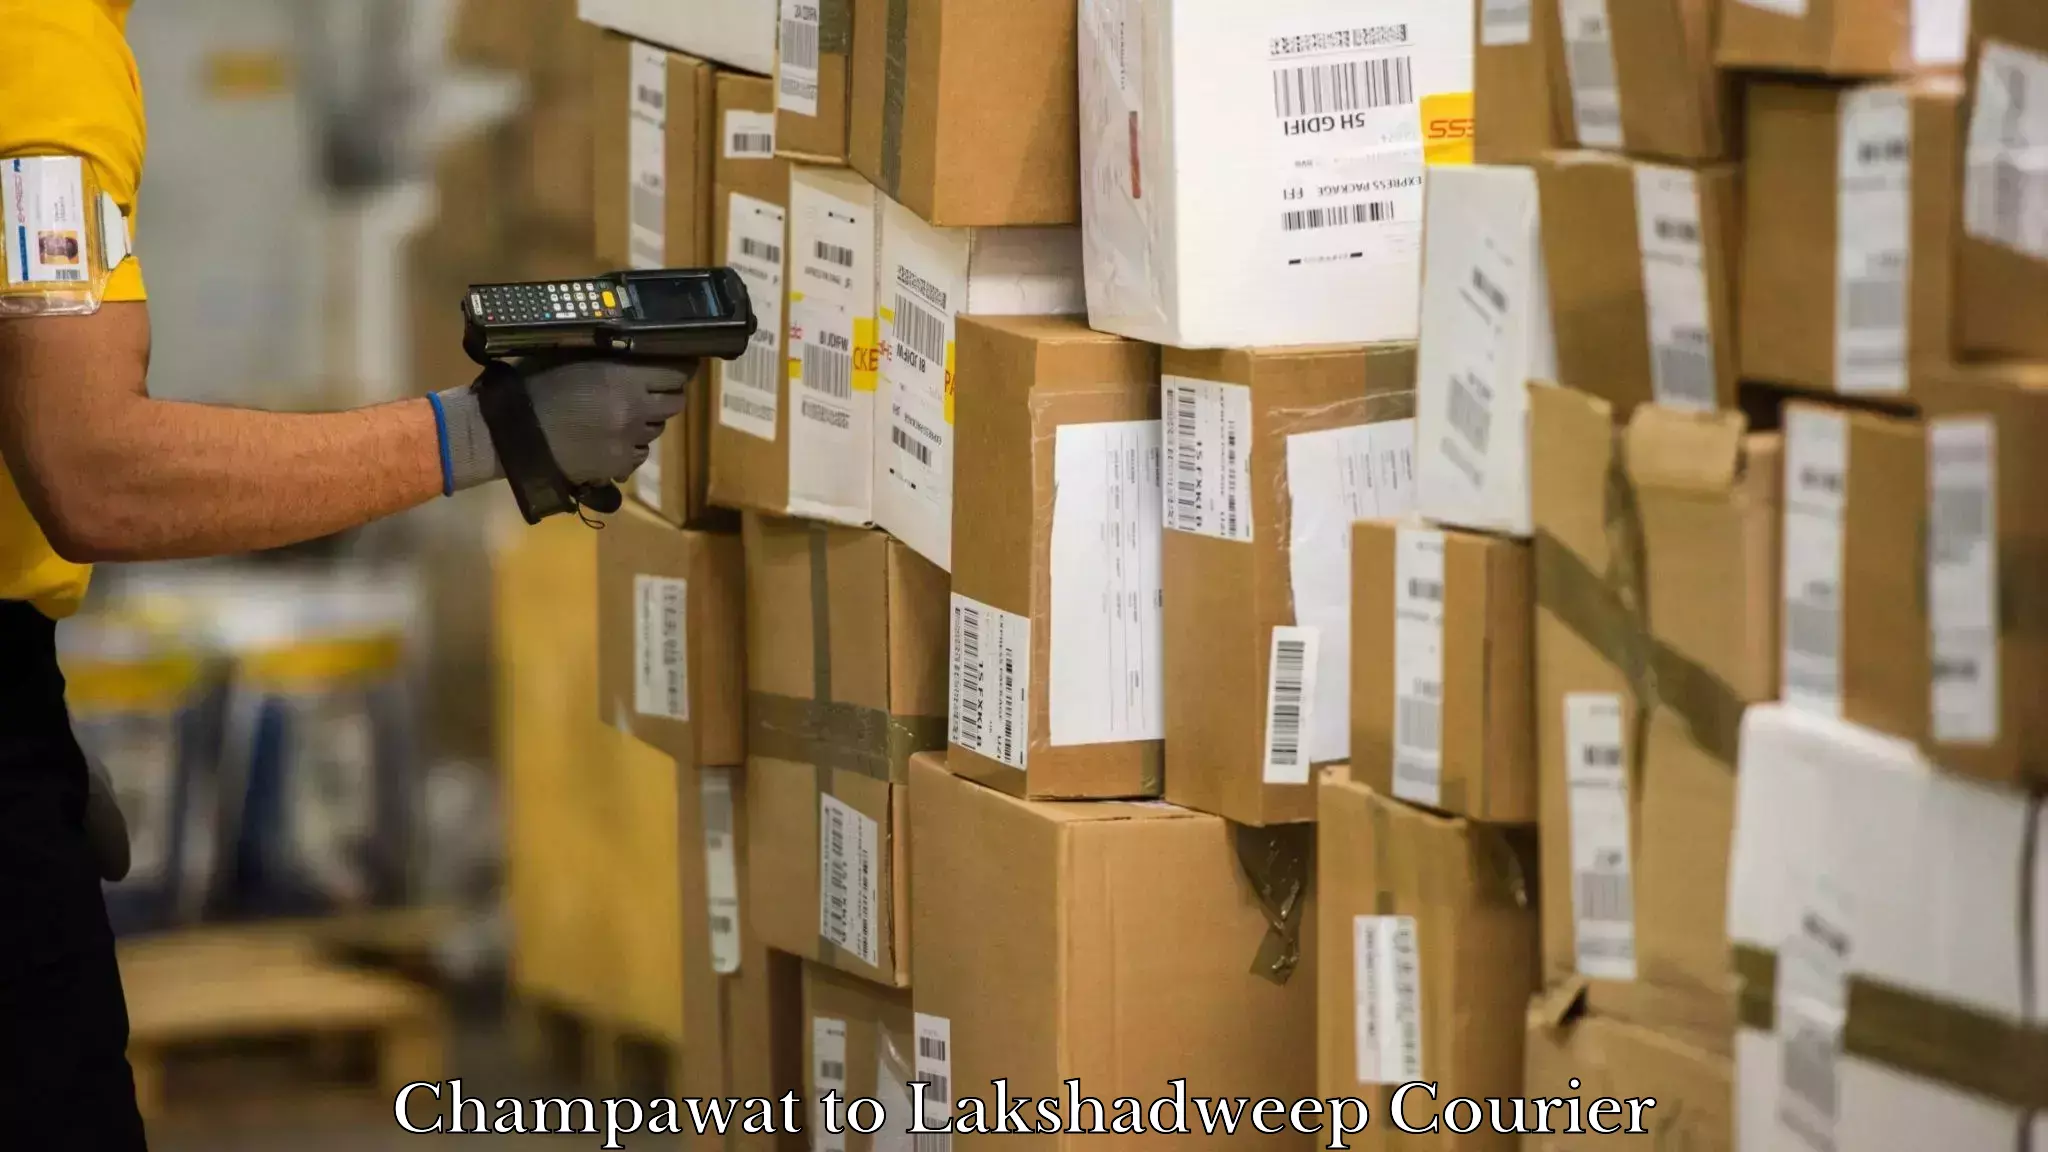 Easy access courier services Champawat to Lakshadweep